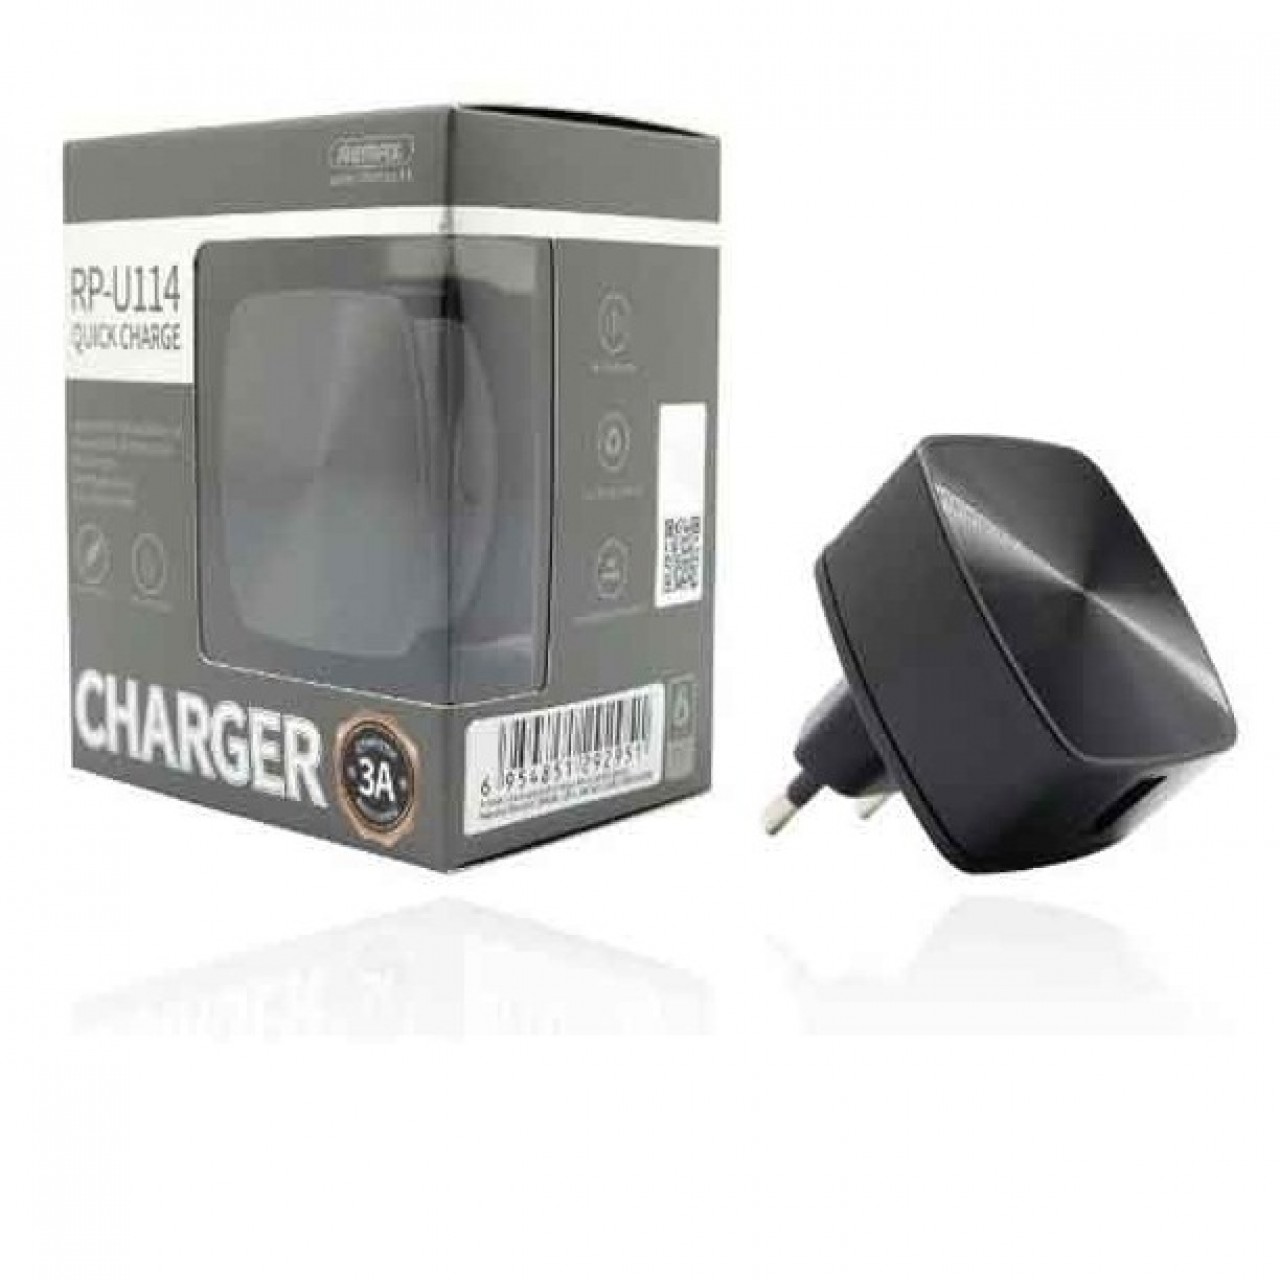 Remax Fast Charger RP-U114 Single Port Quick Charger 3A - Black